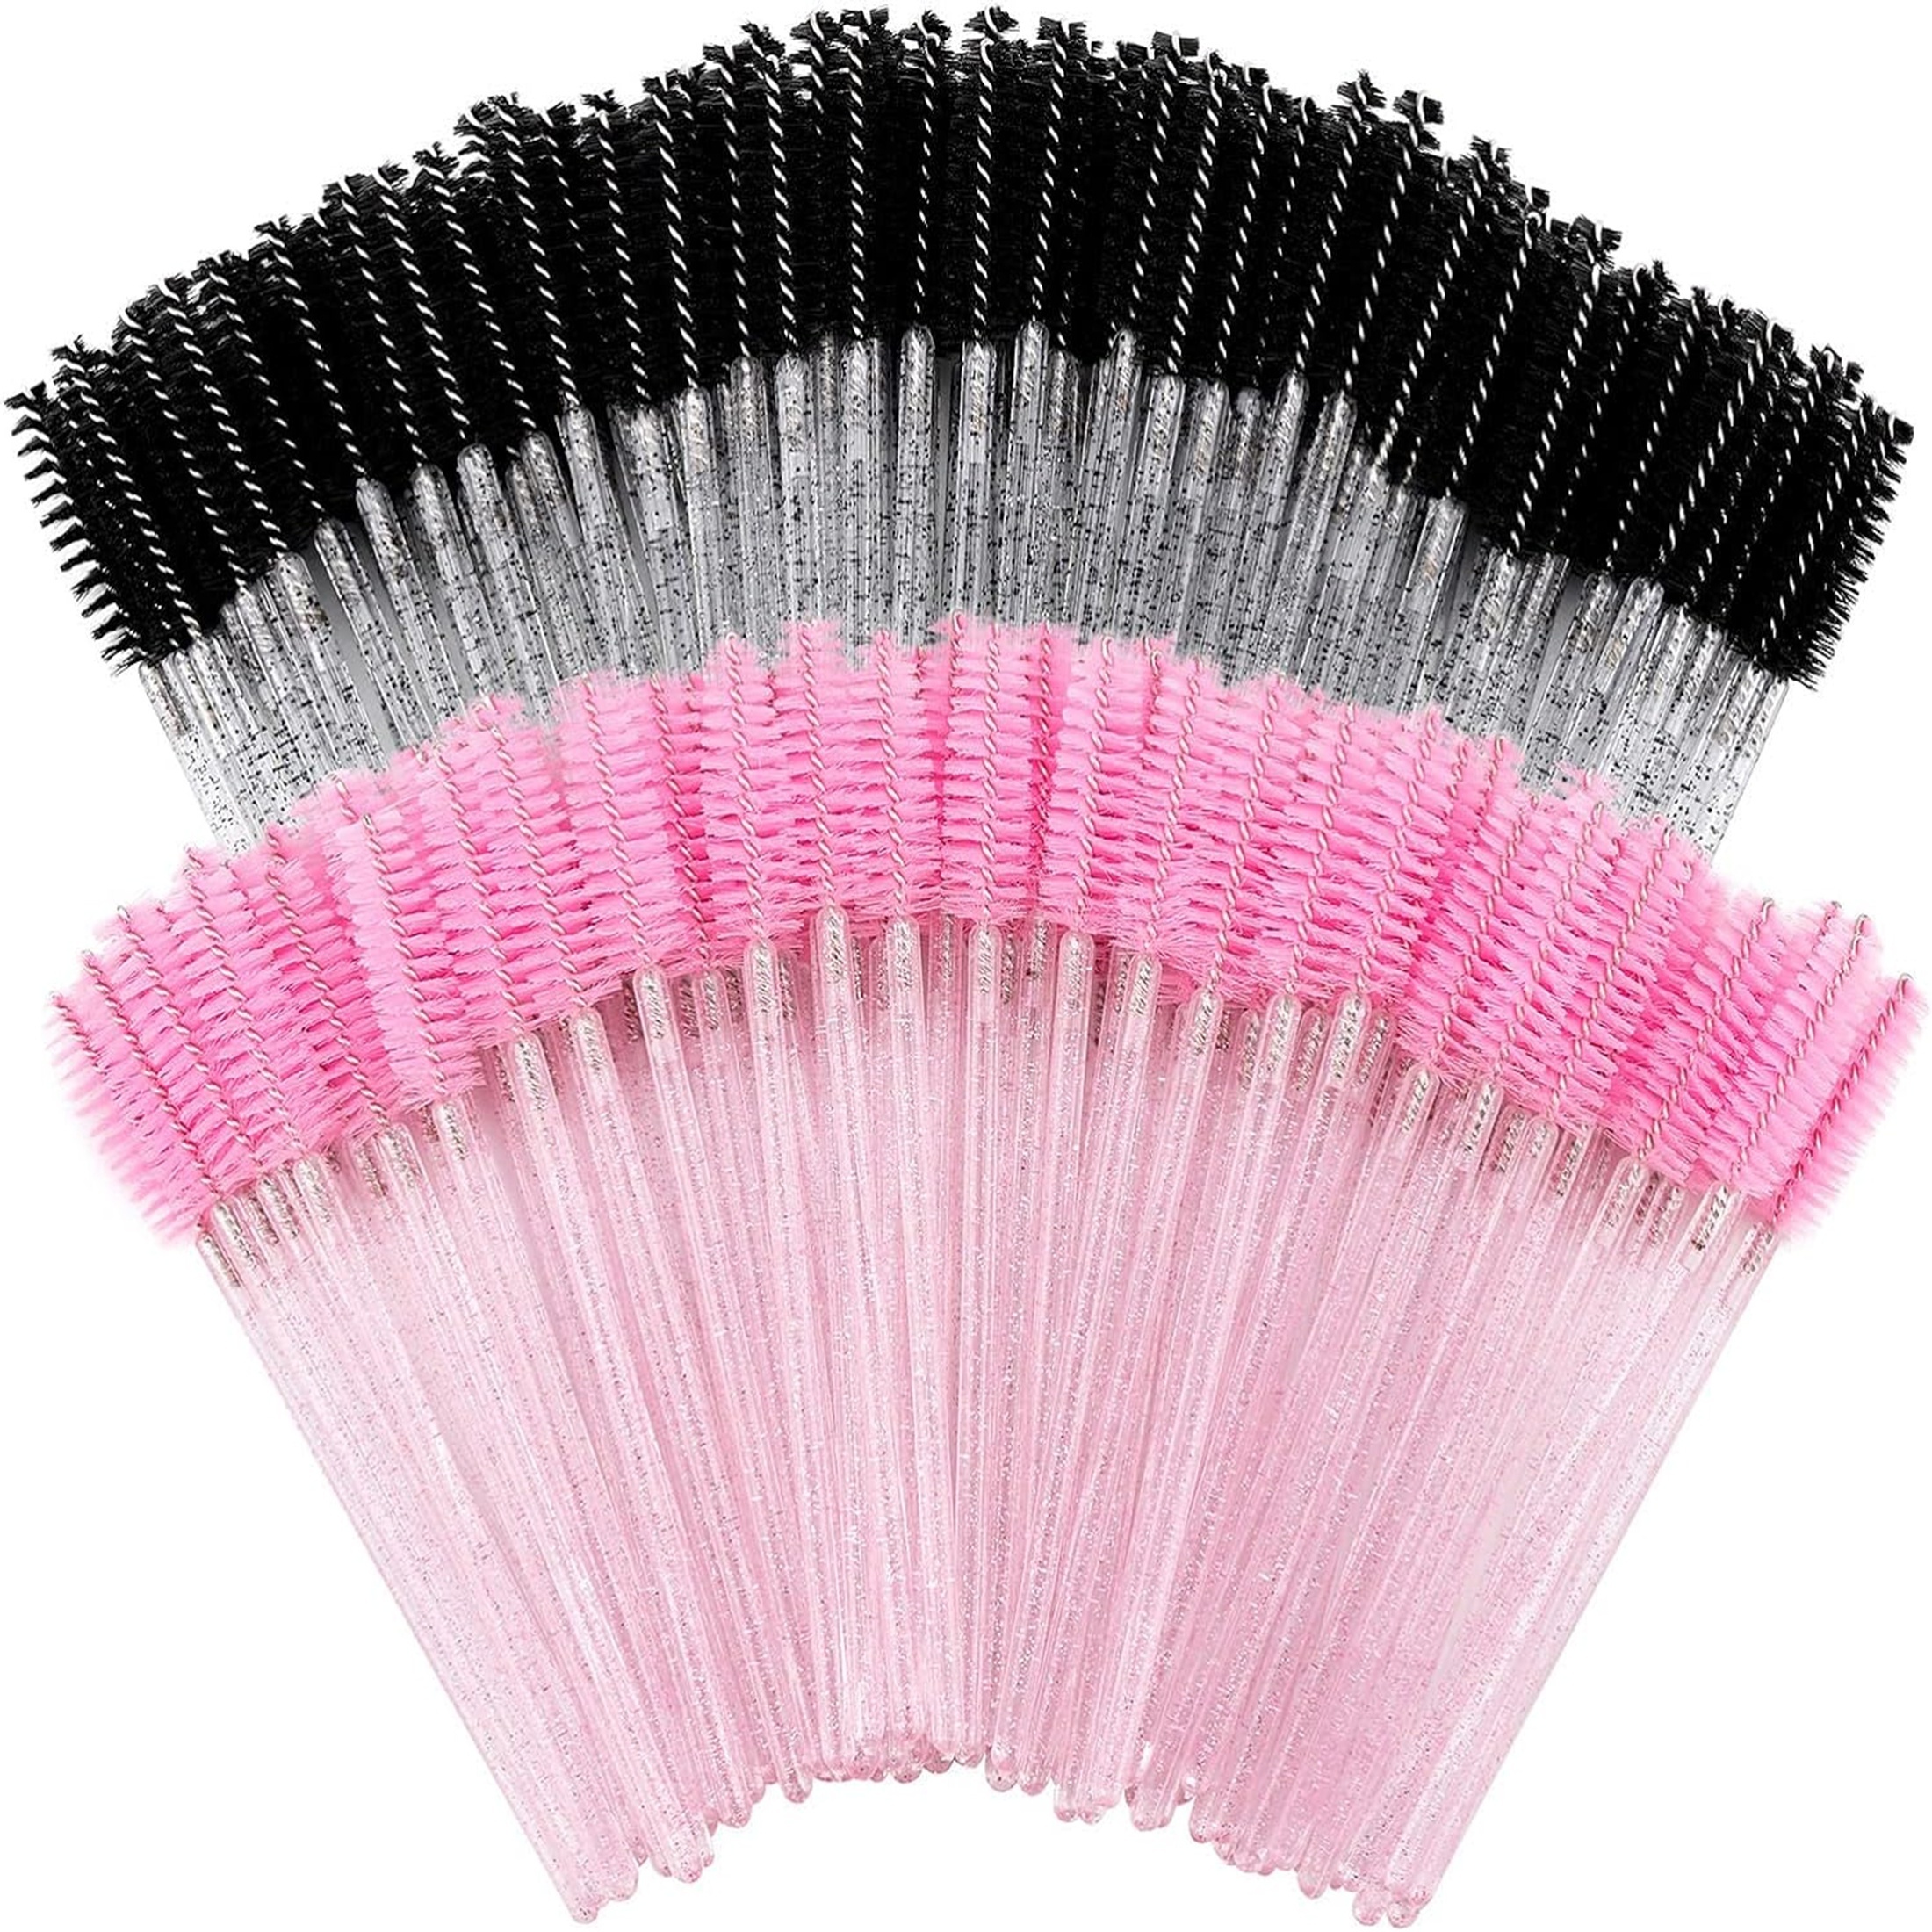 

100pcs Disposable Mascara Wands, Nylon Bristle Eyelash Brush Spoolies, Unscented Eyebrow Extension Applicator With Abs Plastic Rod, Normal Skin Compatible - Pink And Black Wand Set.